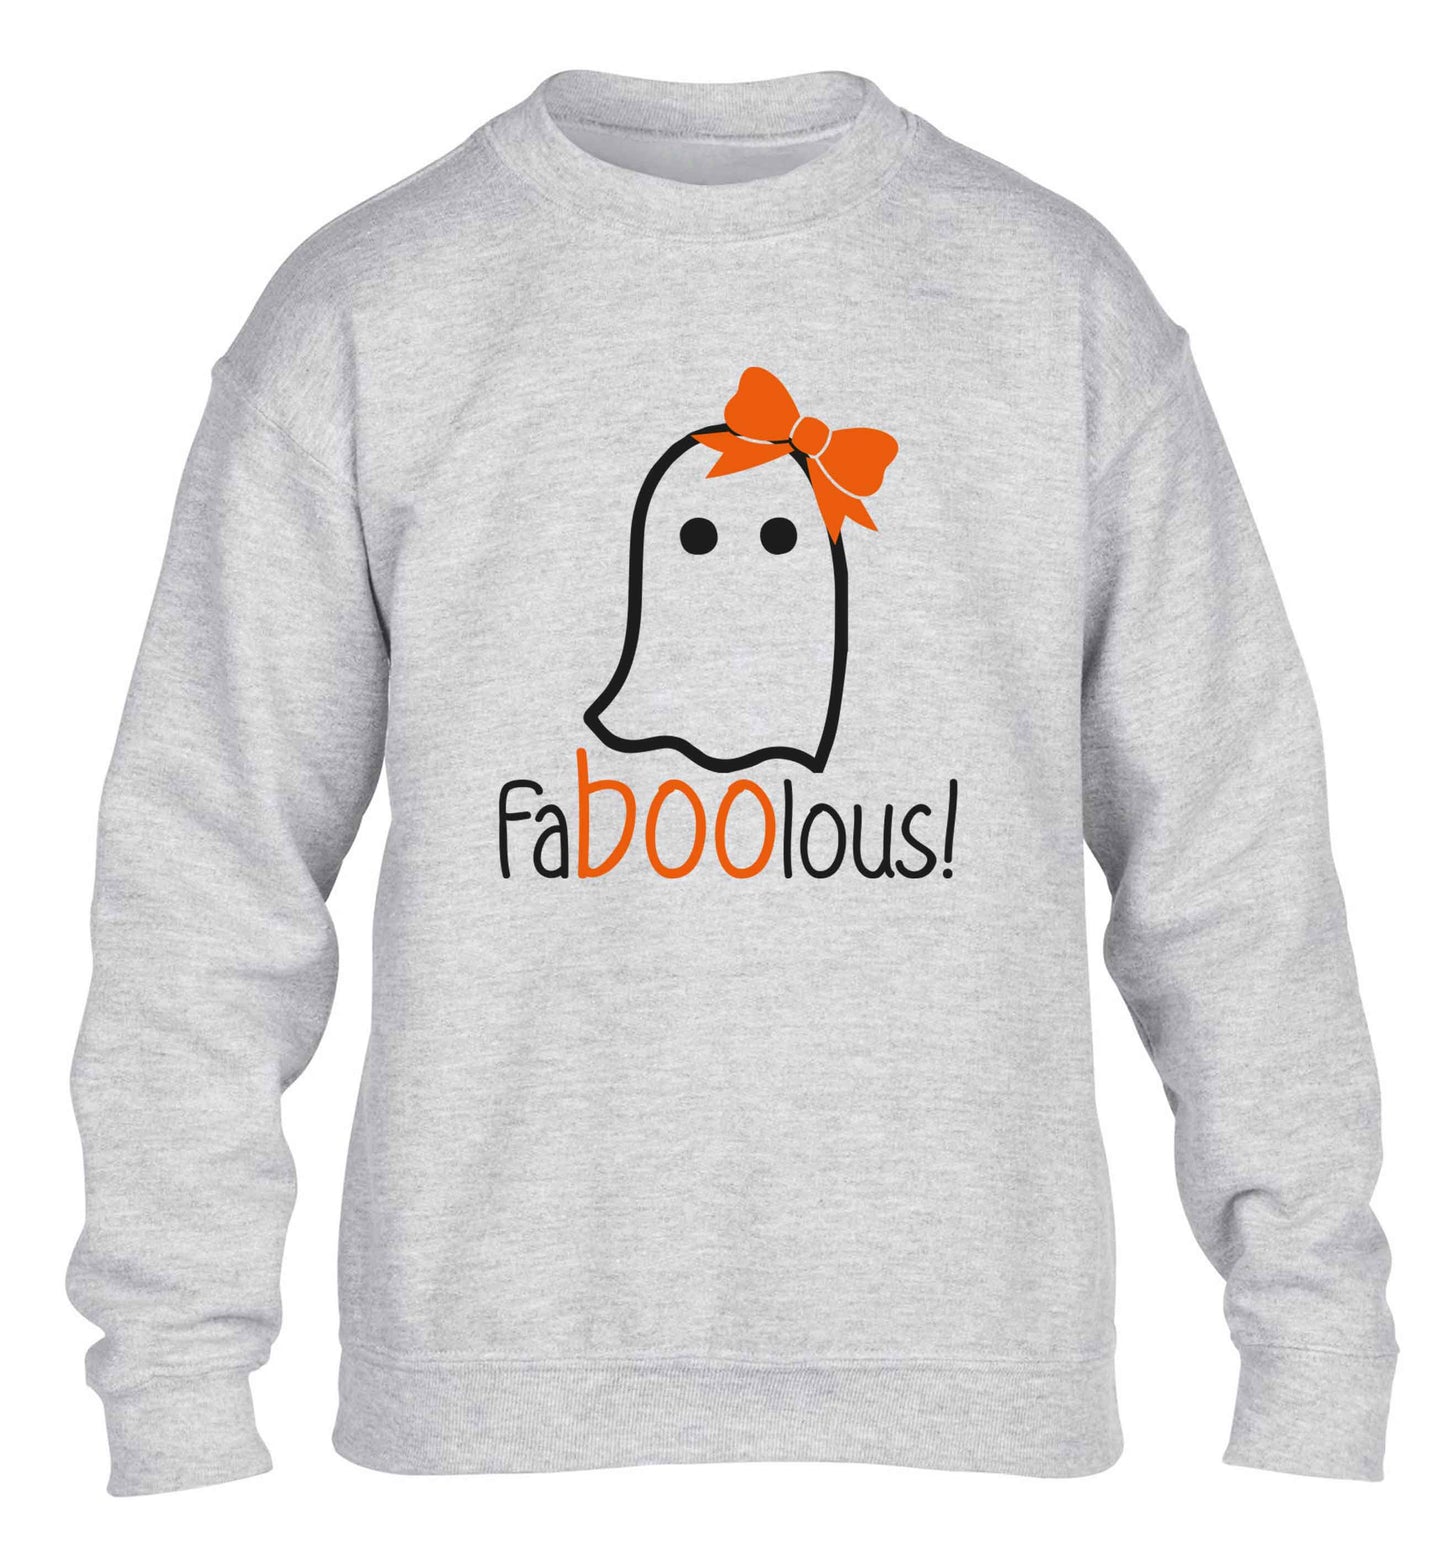 Faboolous ghost children's grey sweater 12-13 Years